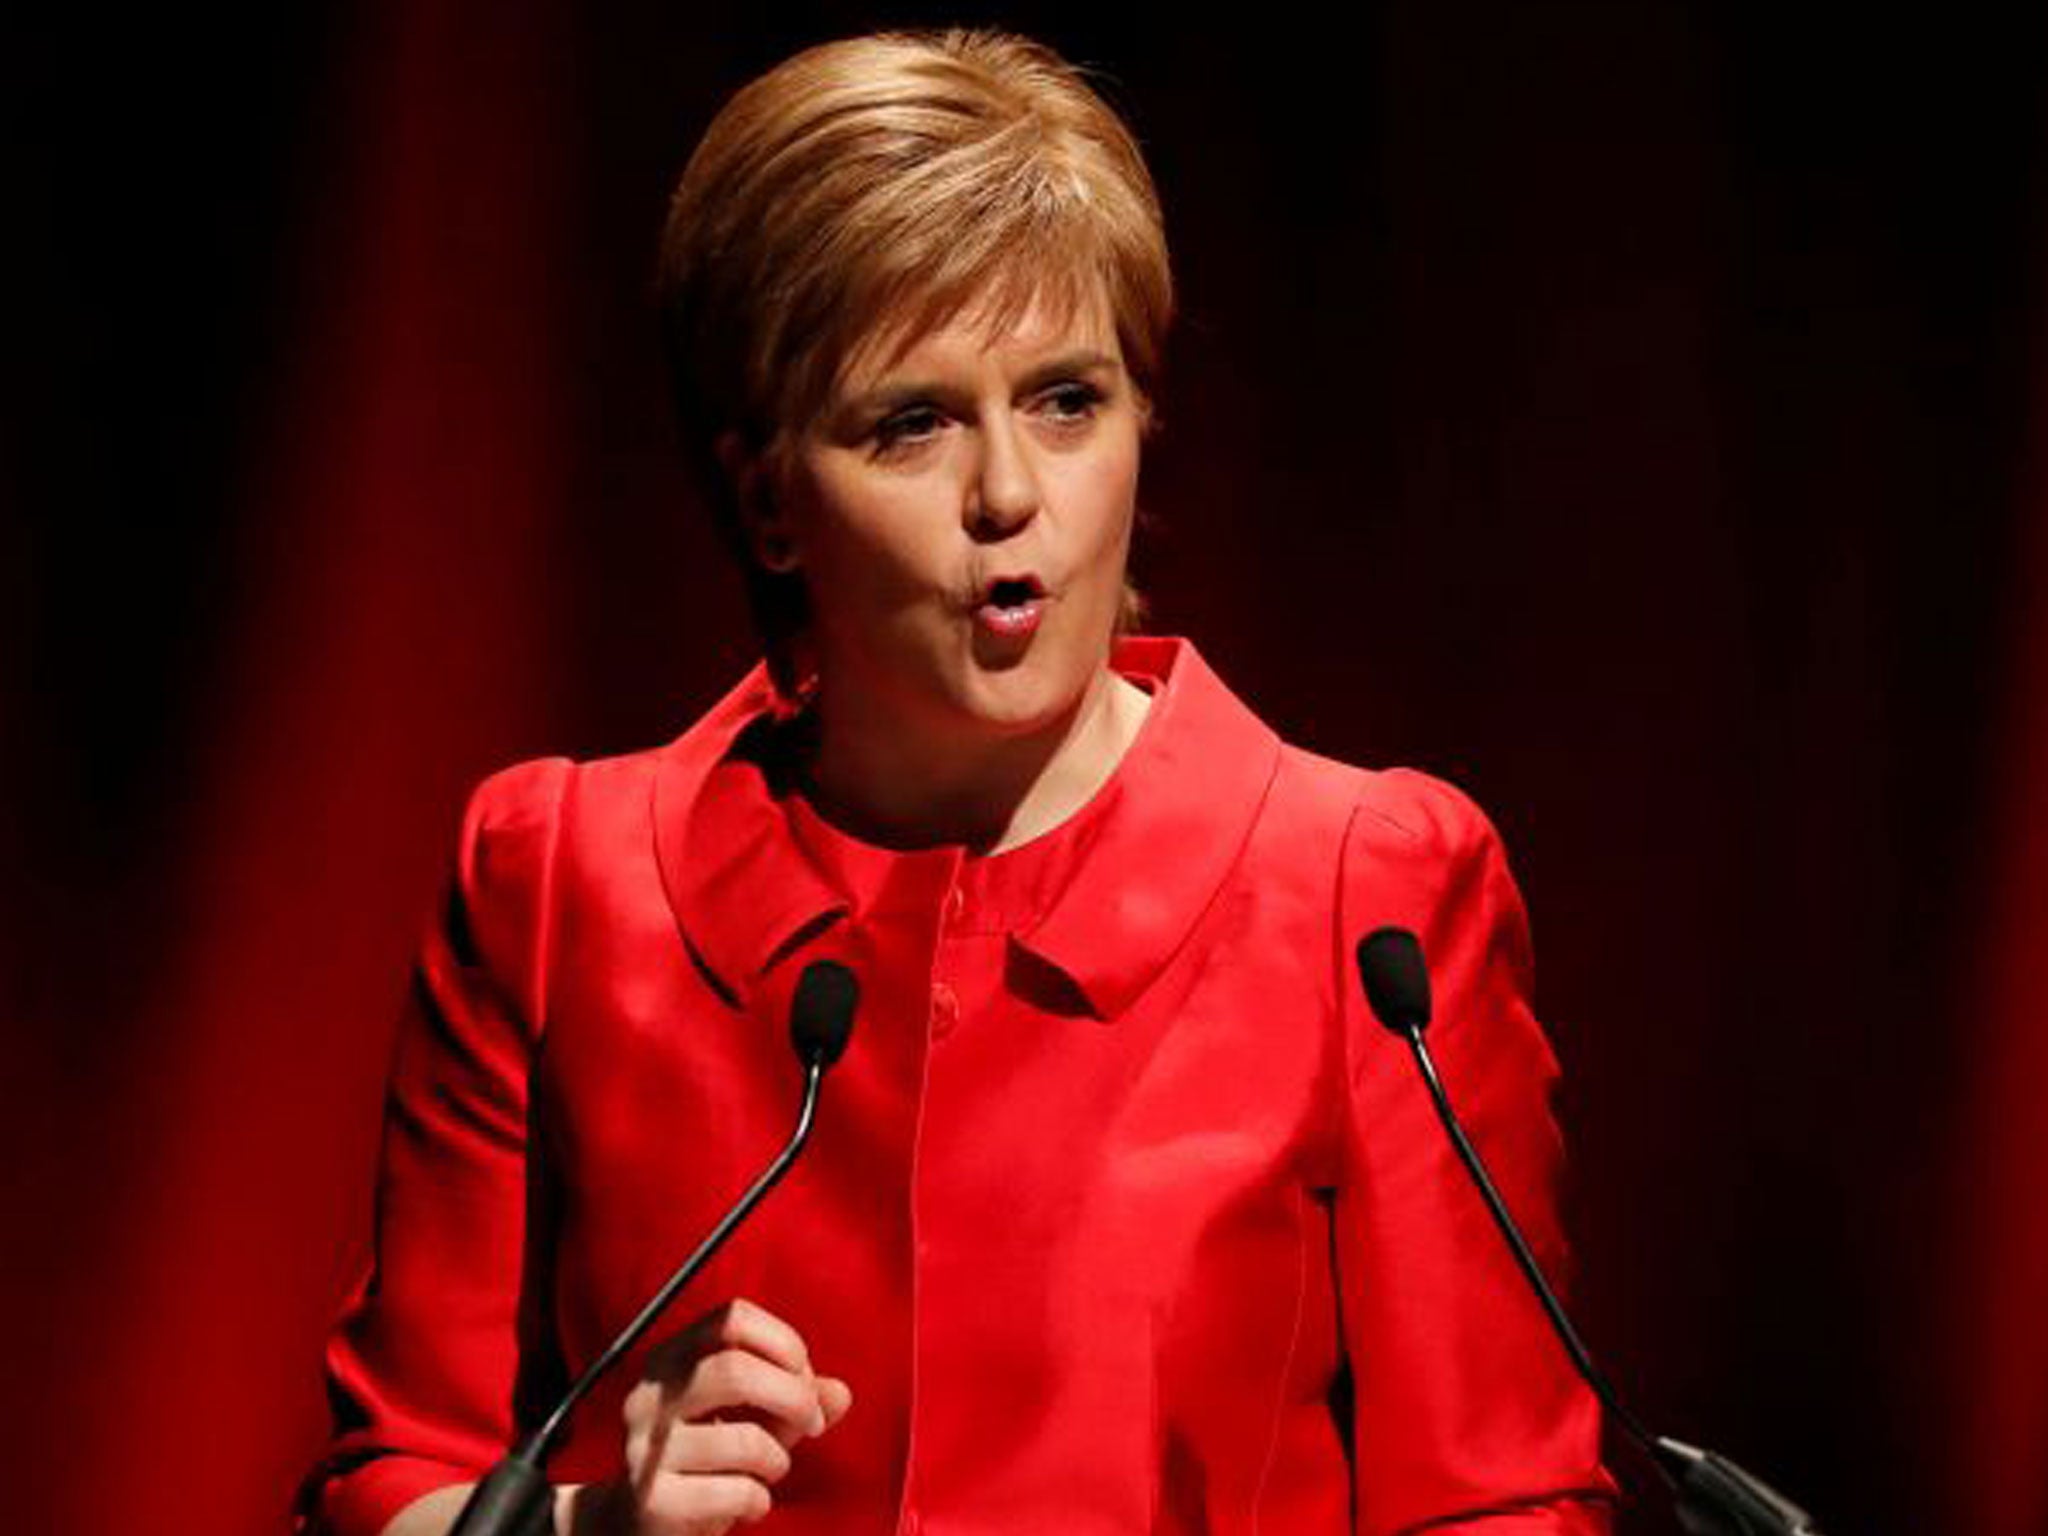 SNP leader and Scotland's First Minister Nicola Sturgeon